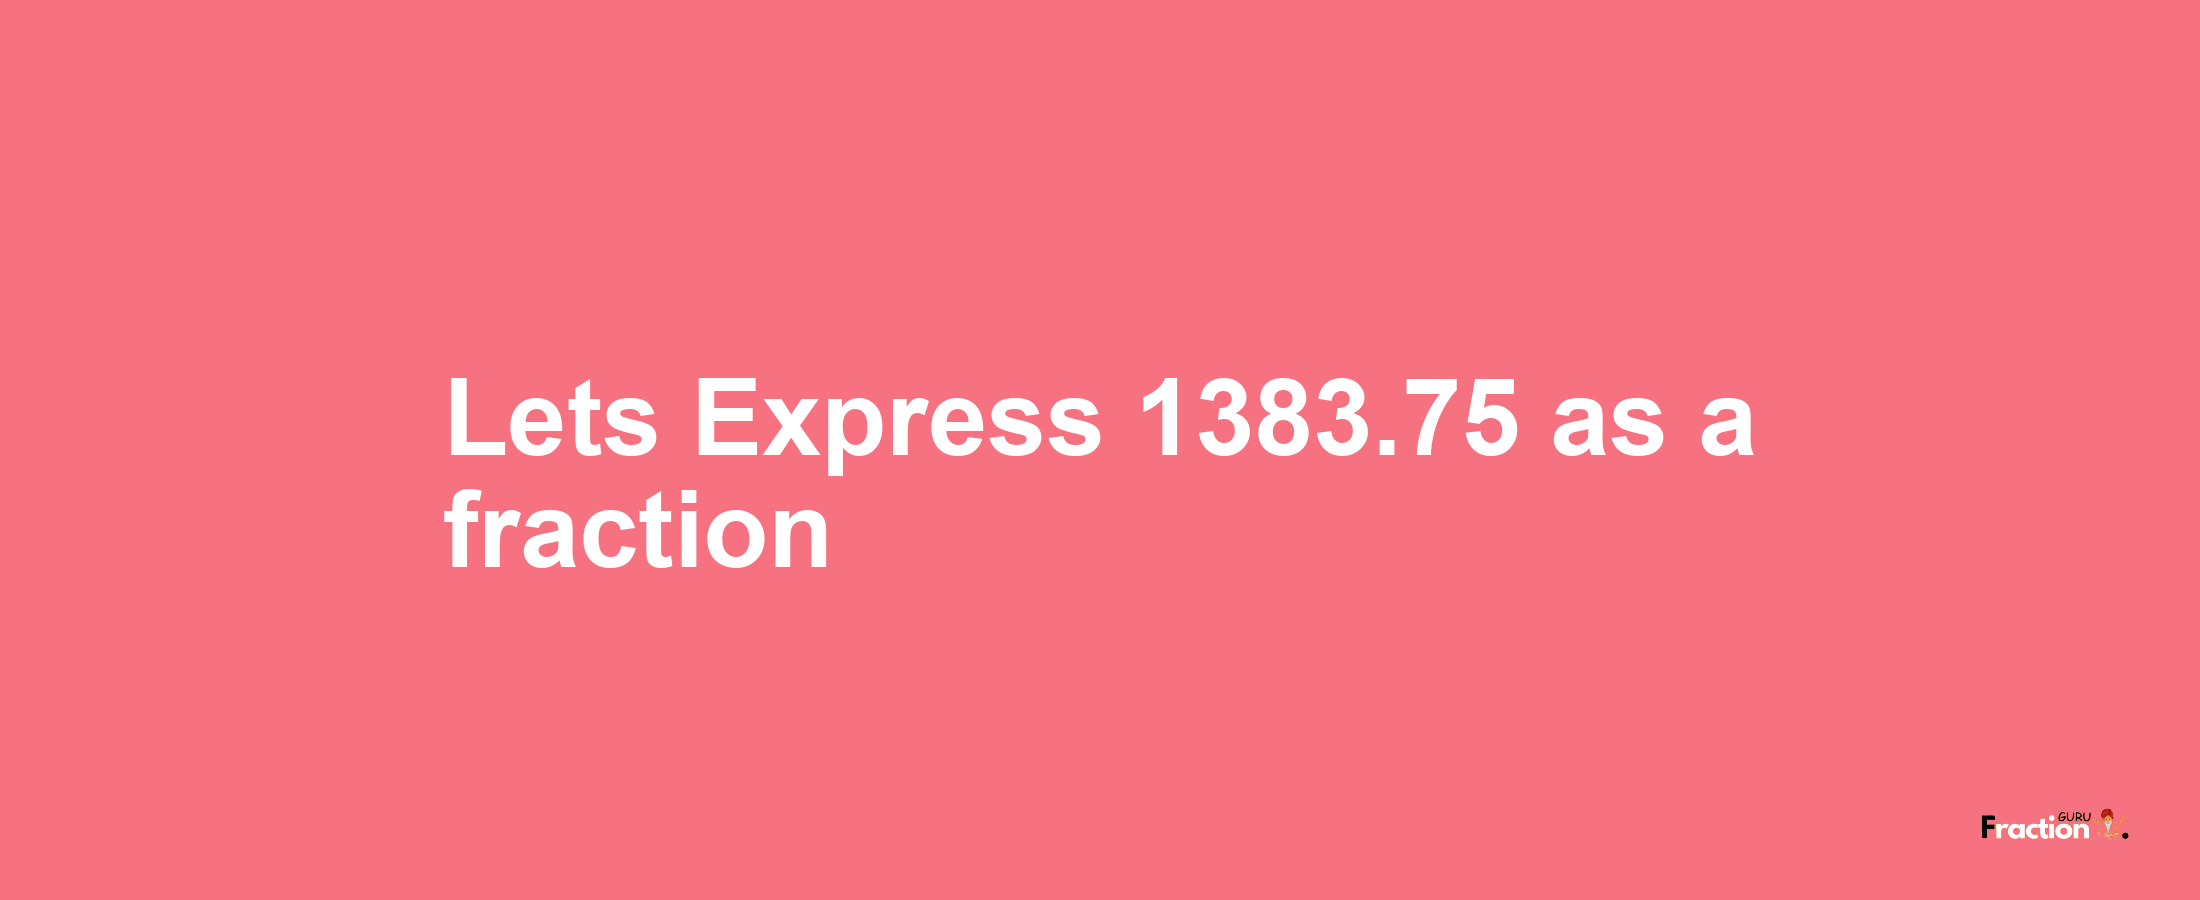 Lets Express 1383.75 as afraction